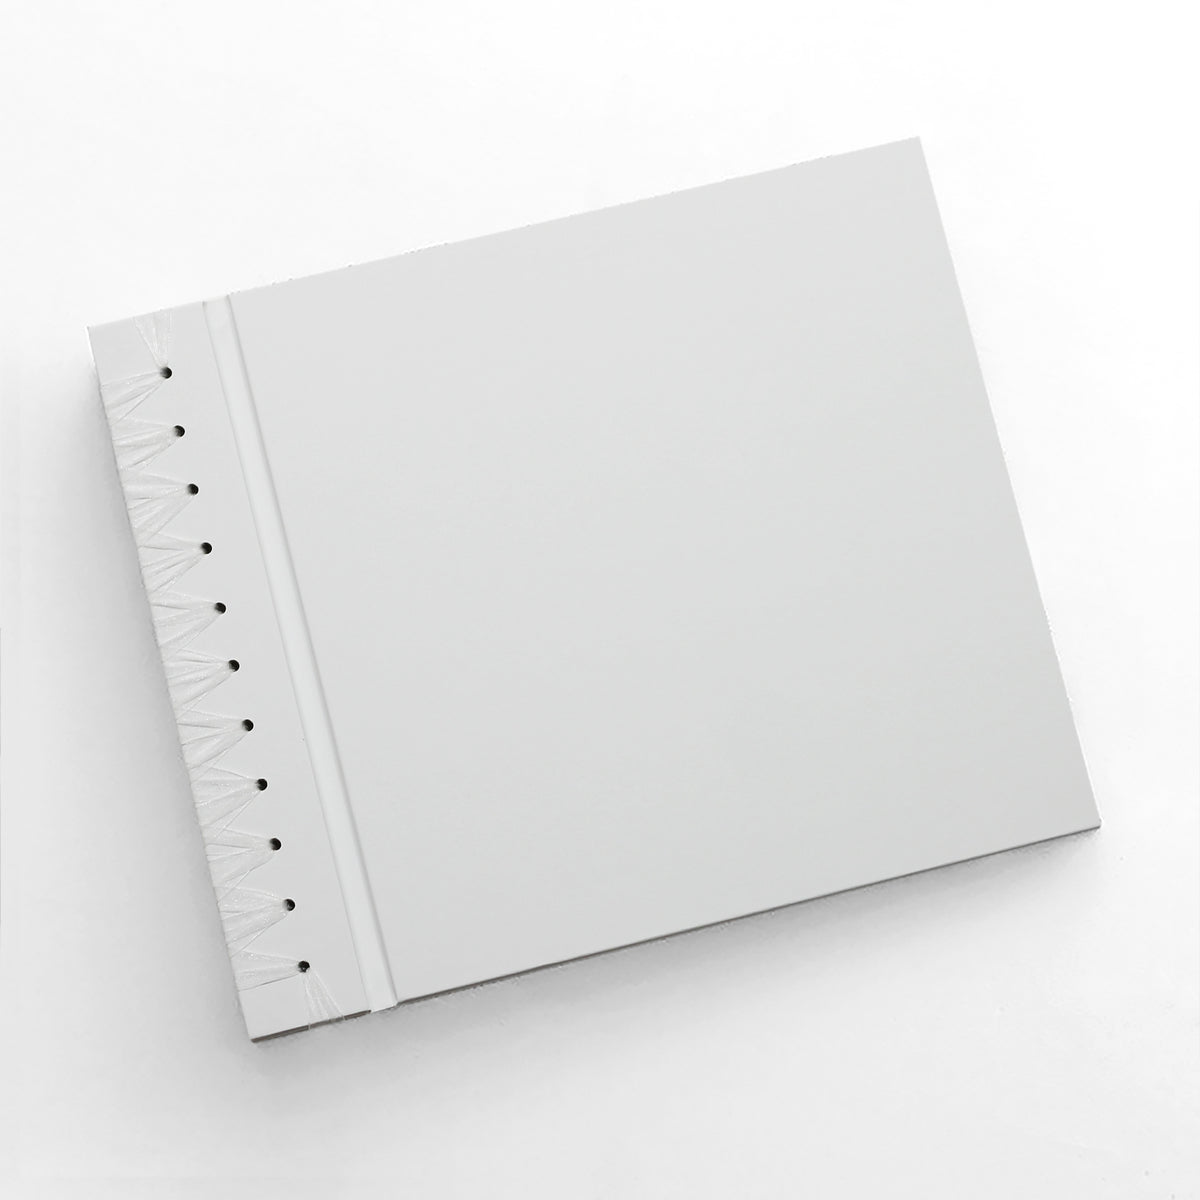 Deluxe 12 x 15 Paper Page Album | Cover: White Vegan Leather | Available Personalized